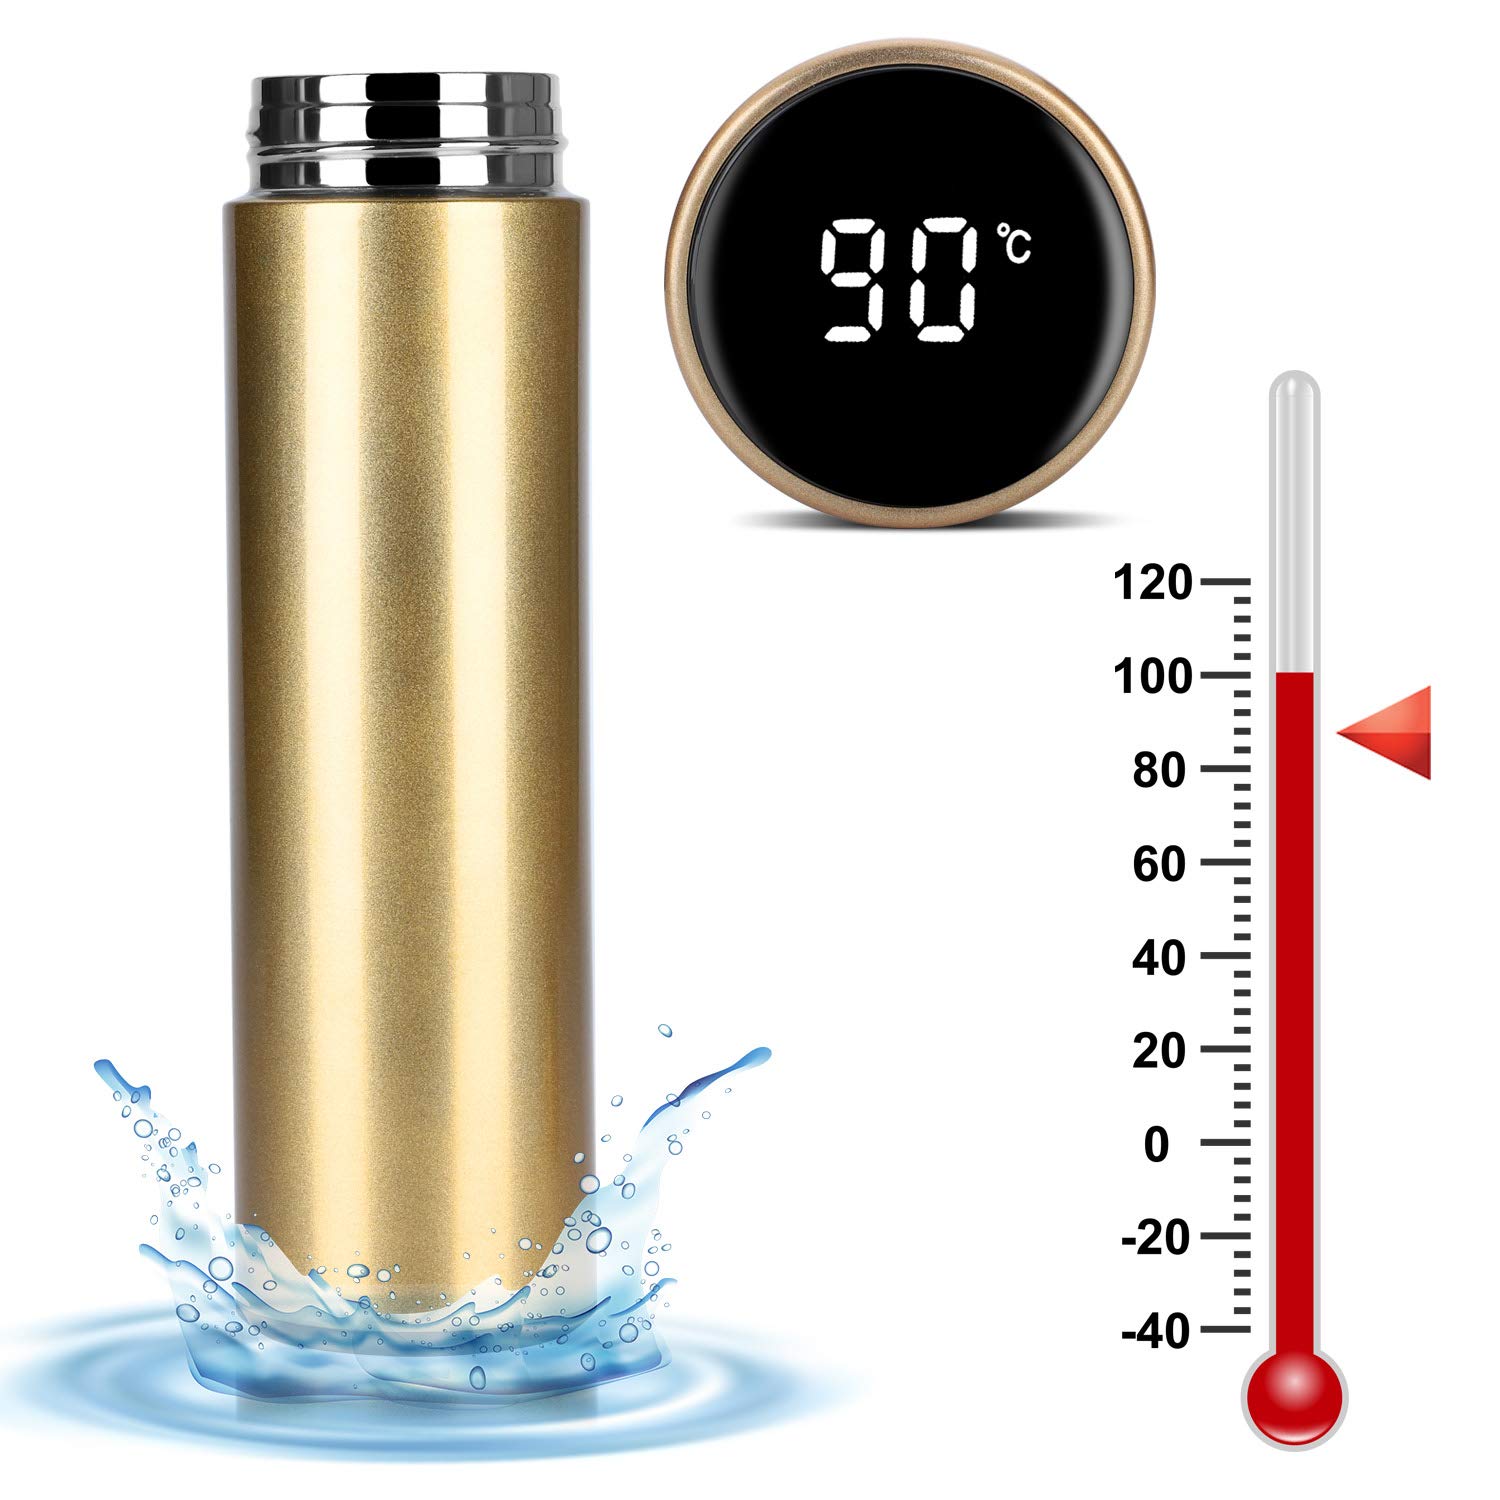 Temperature Display Vacuum Insulated Water Bottle 17oz,Thermo Flask Made of Premium Stainless Steel Coffee/ Water, Smart Cup, Novelty Gifts Mug, FDA Safety.